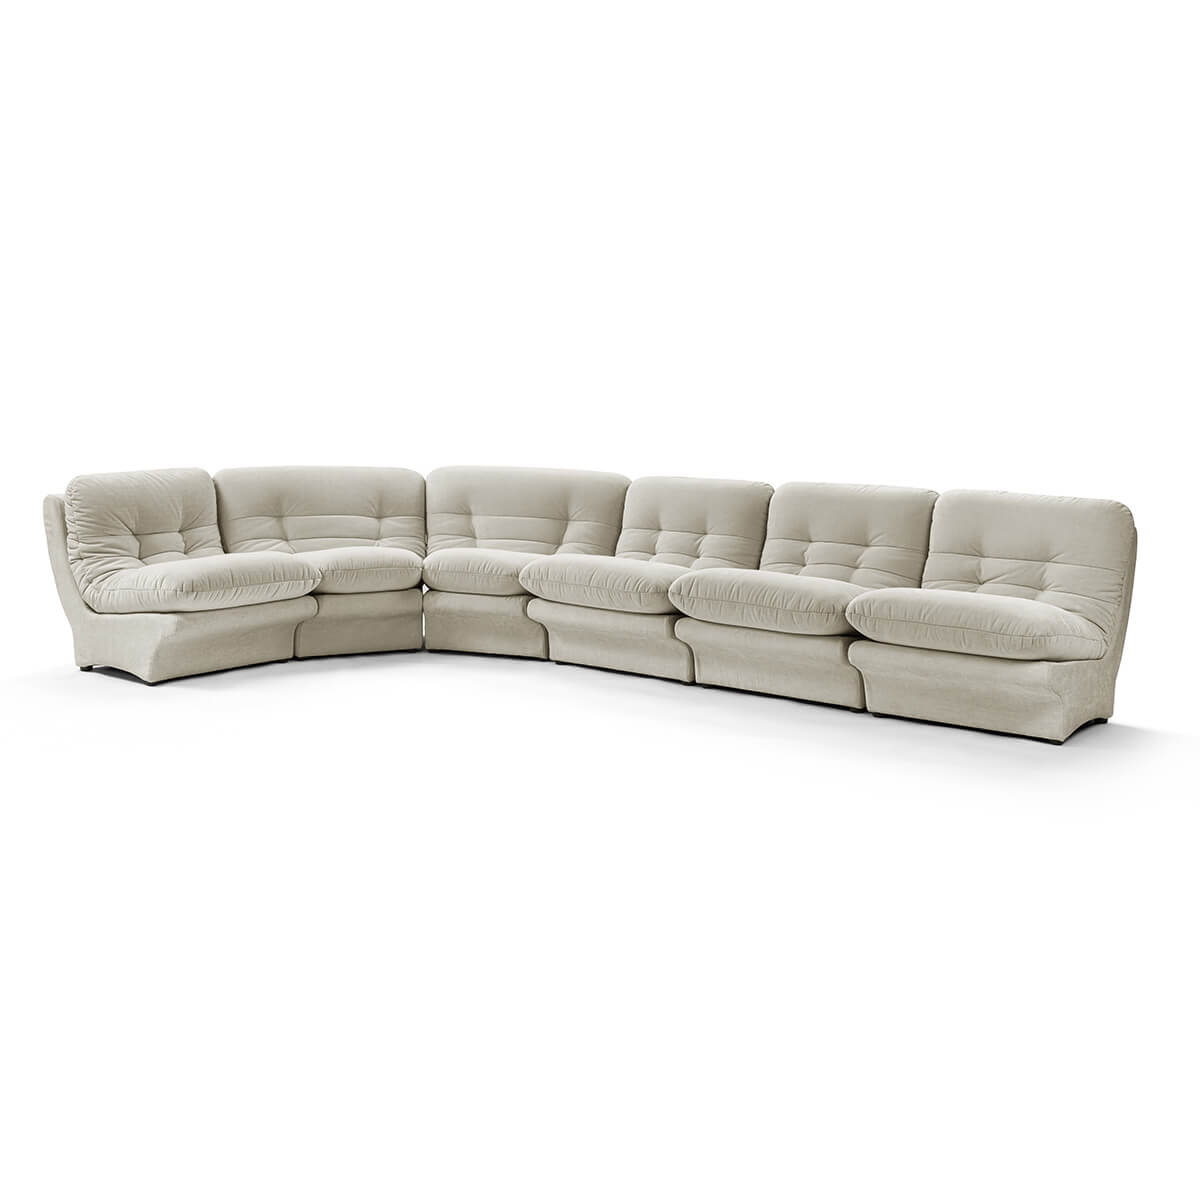 Carsons Mid Century Curved Modular Sectional Sofa / Combination 003 Chenille Helios-Feathered Beige Grey